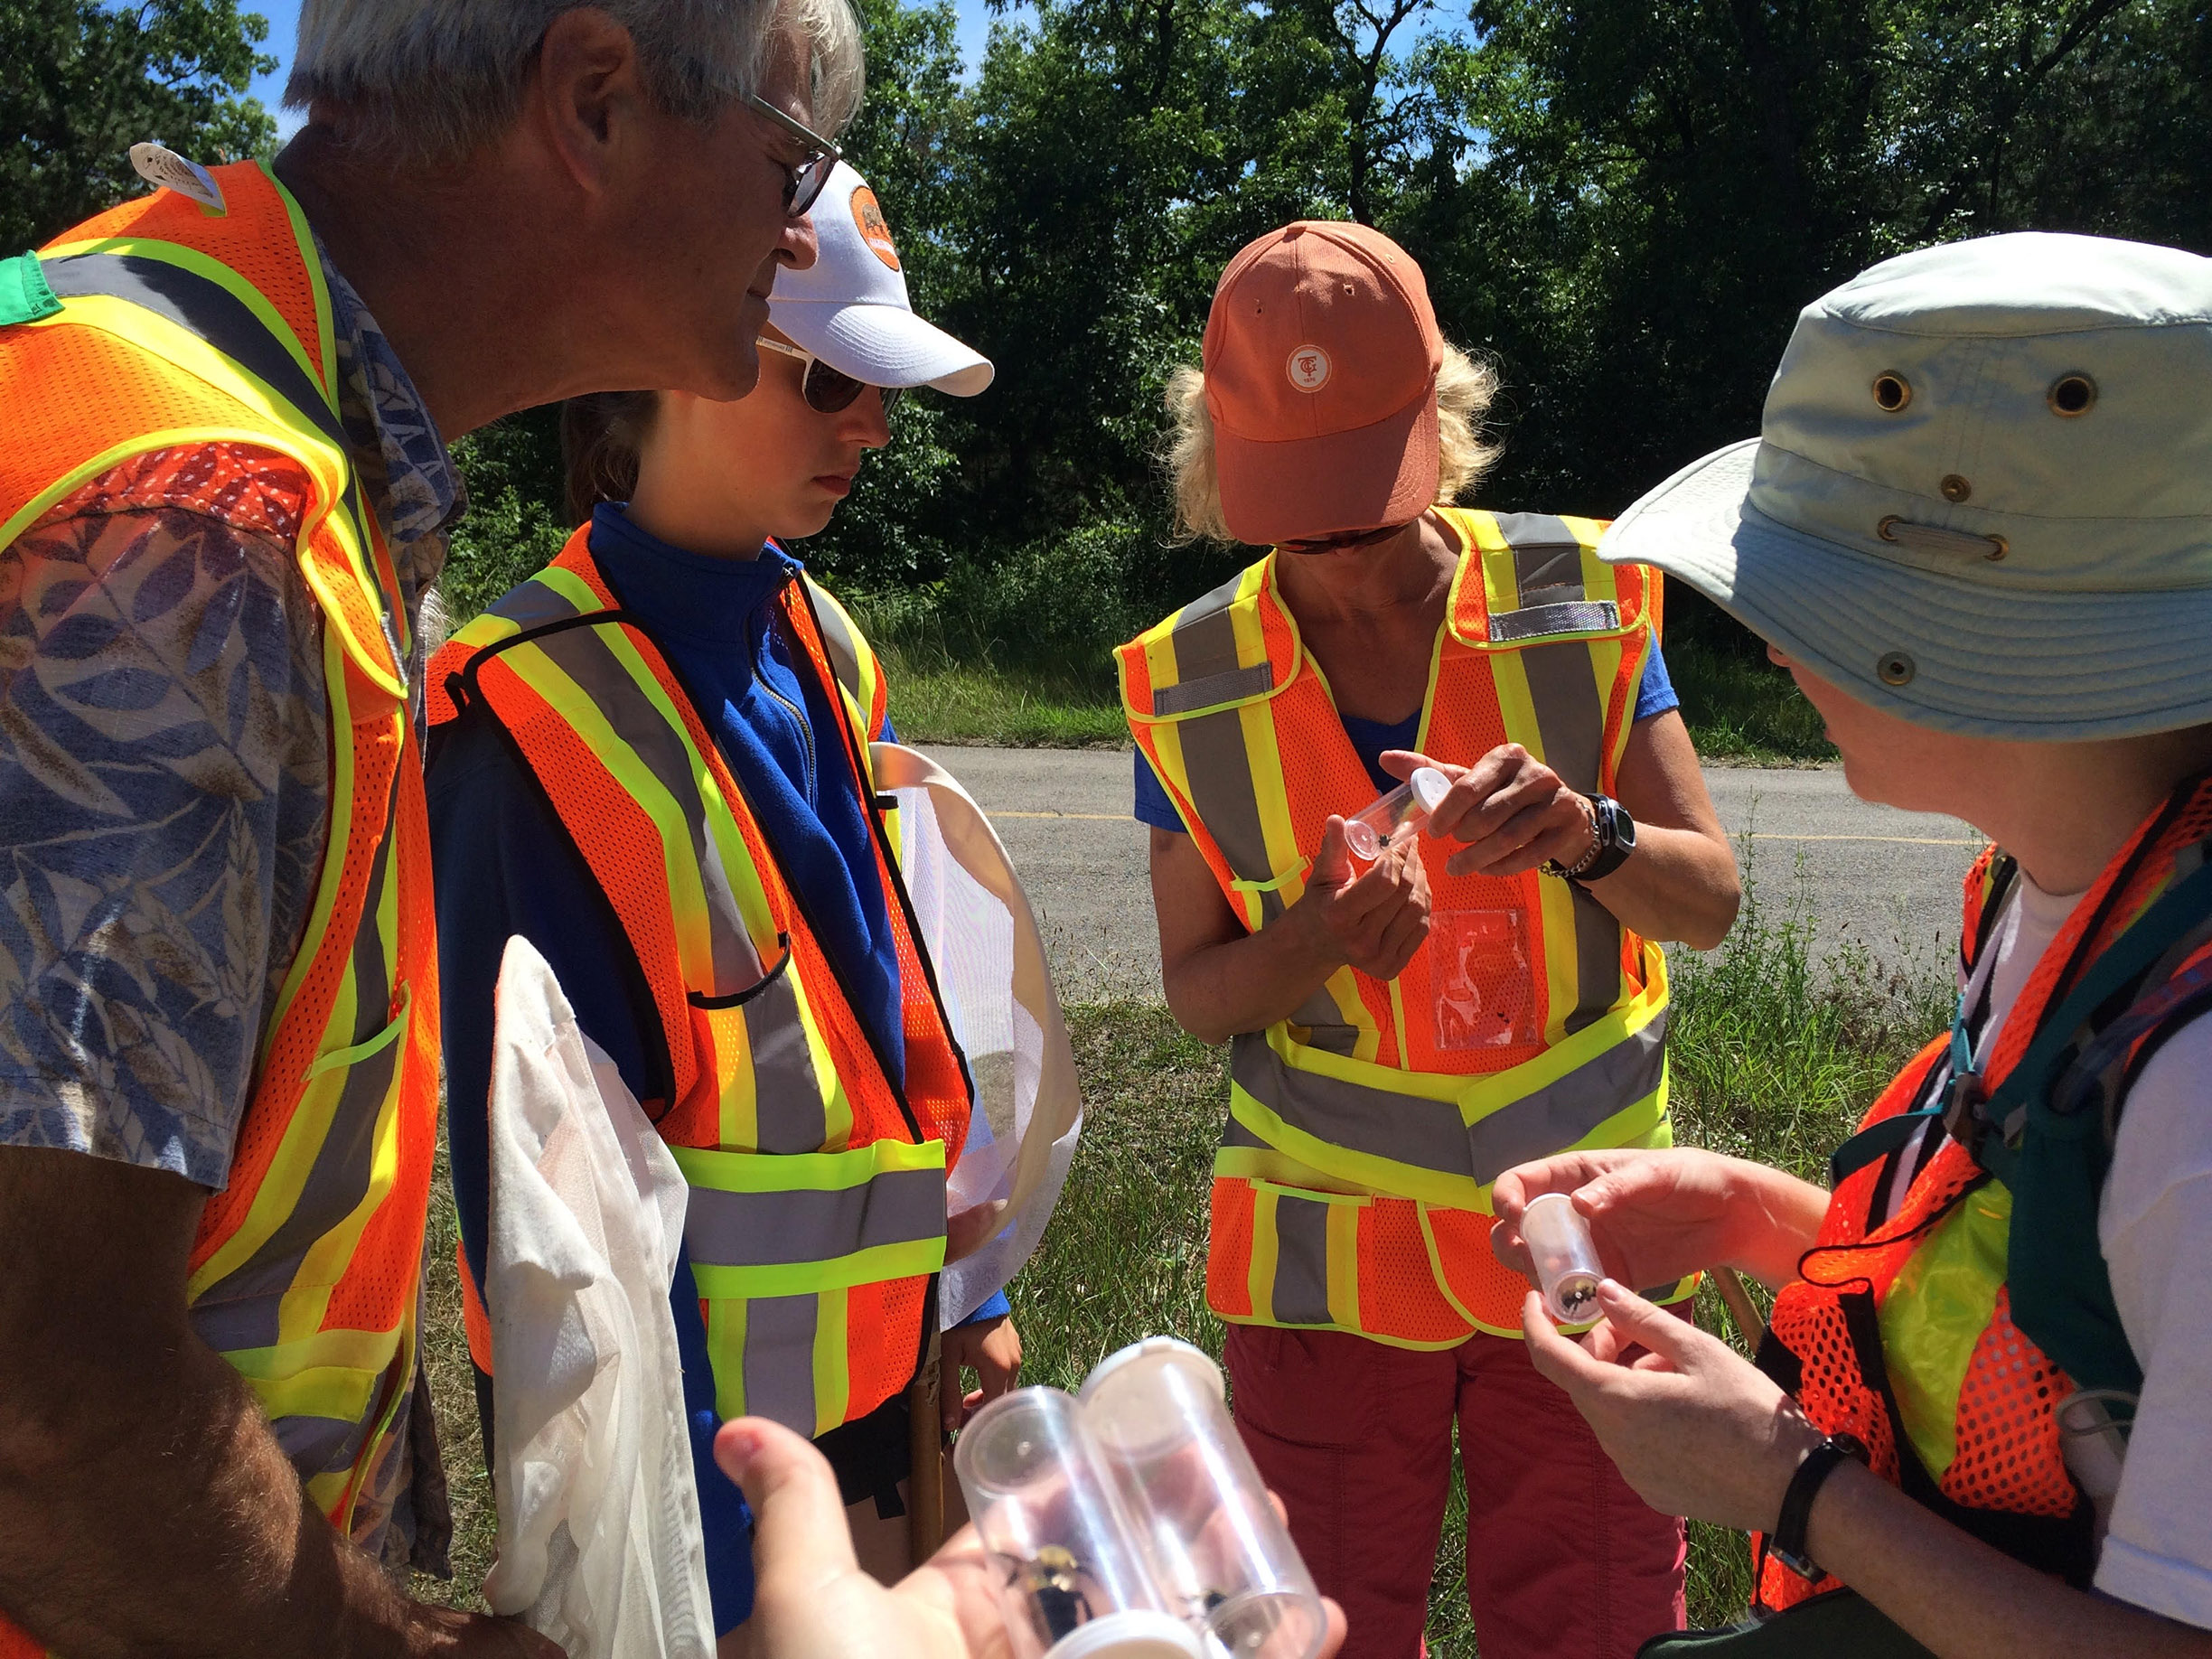 A group of volunteers wearing bright orange safety vests gather around to learn about bumble bee surveys